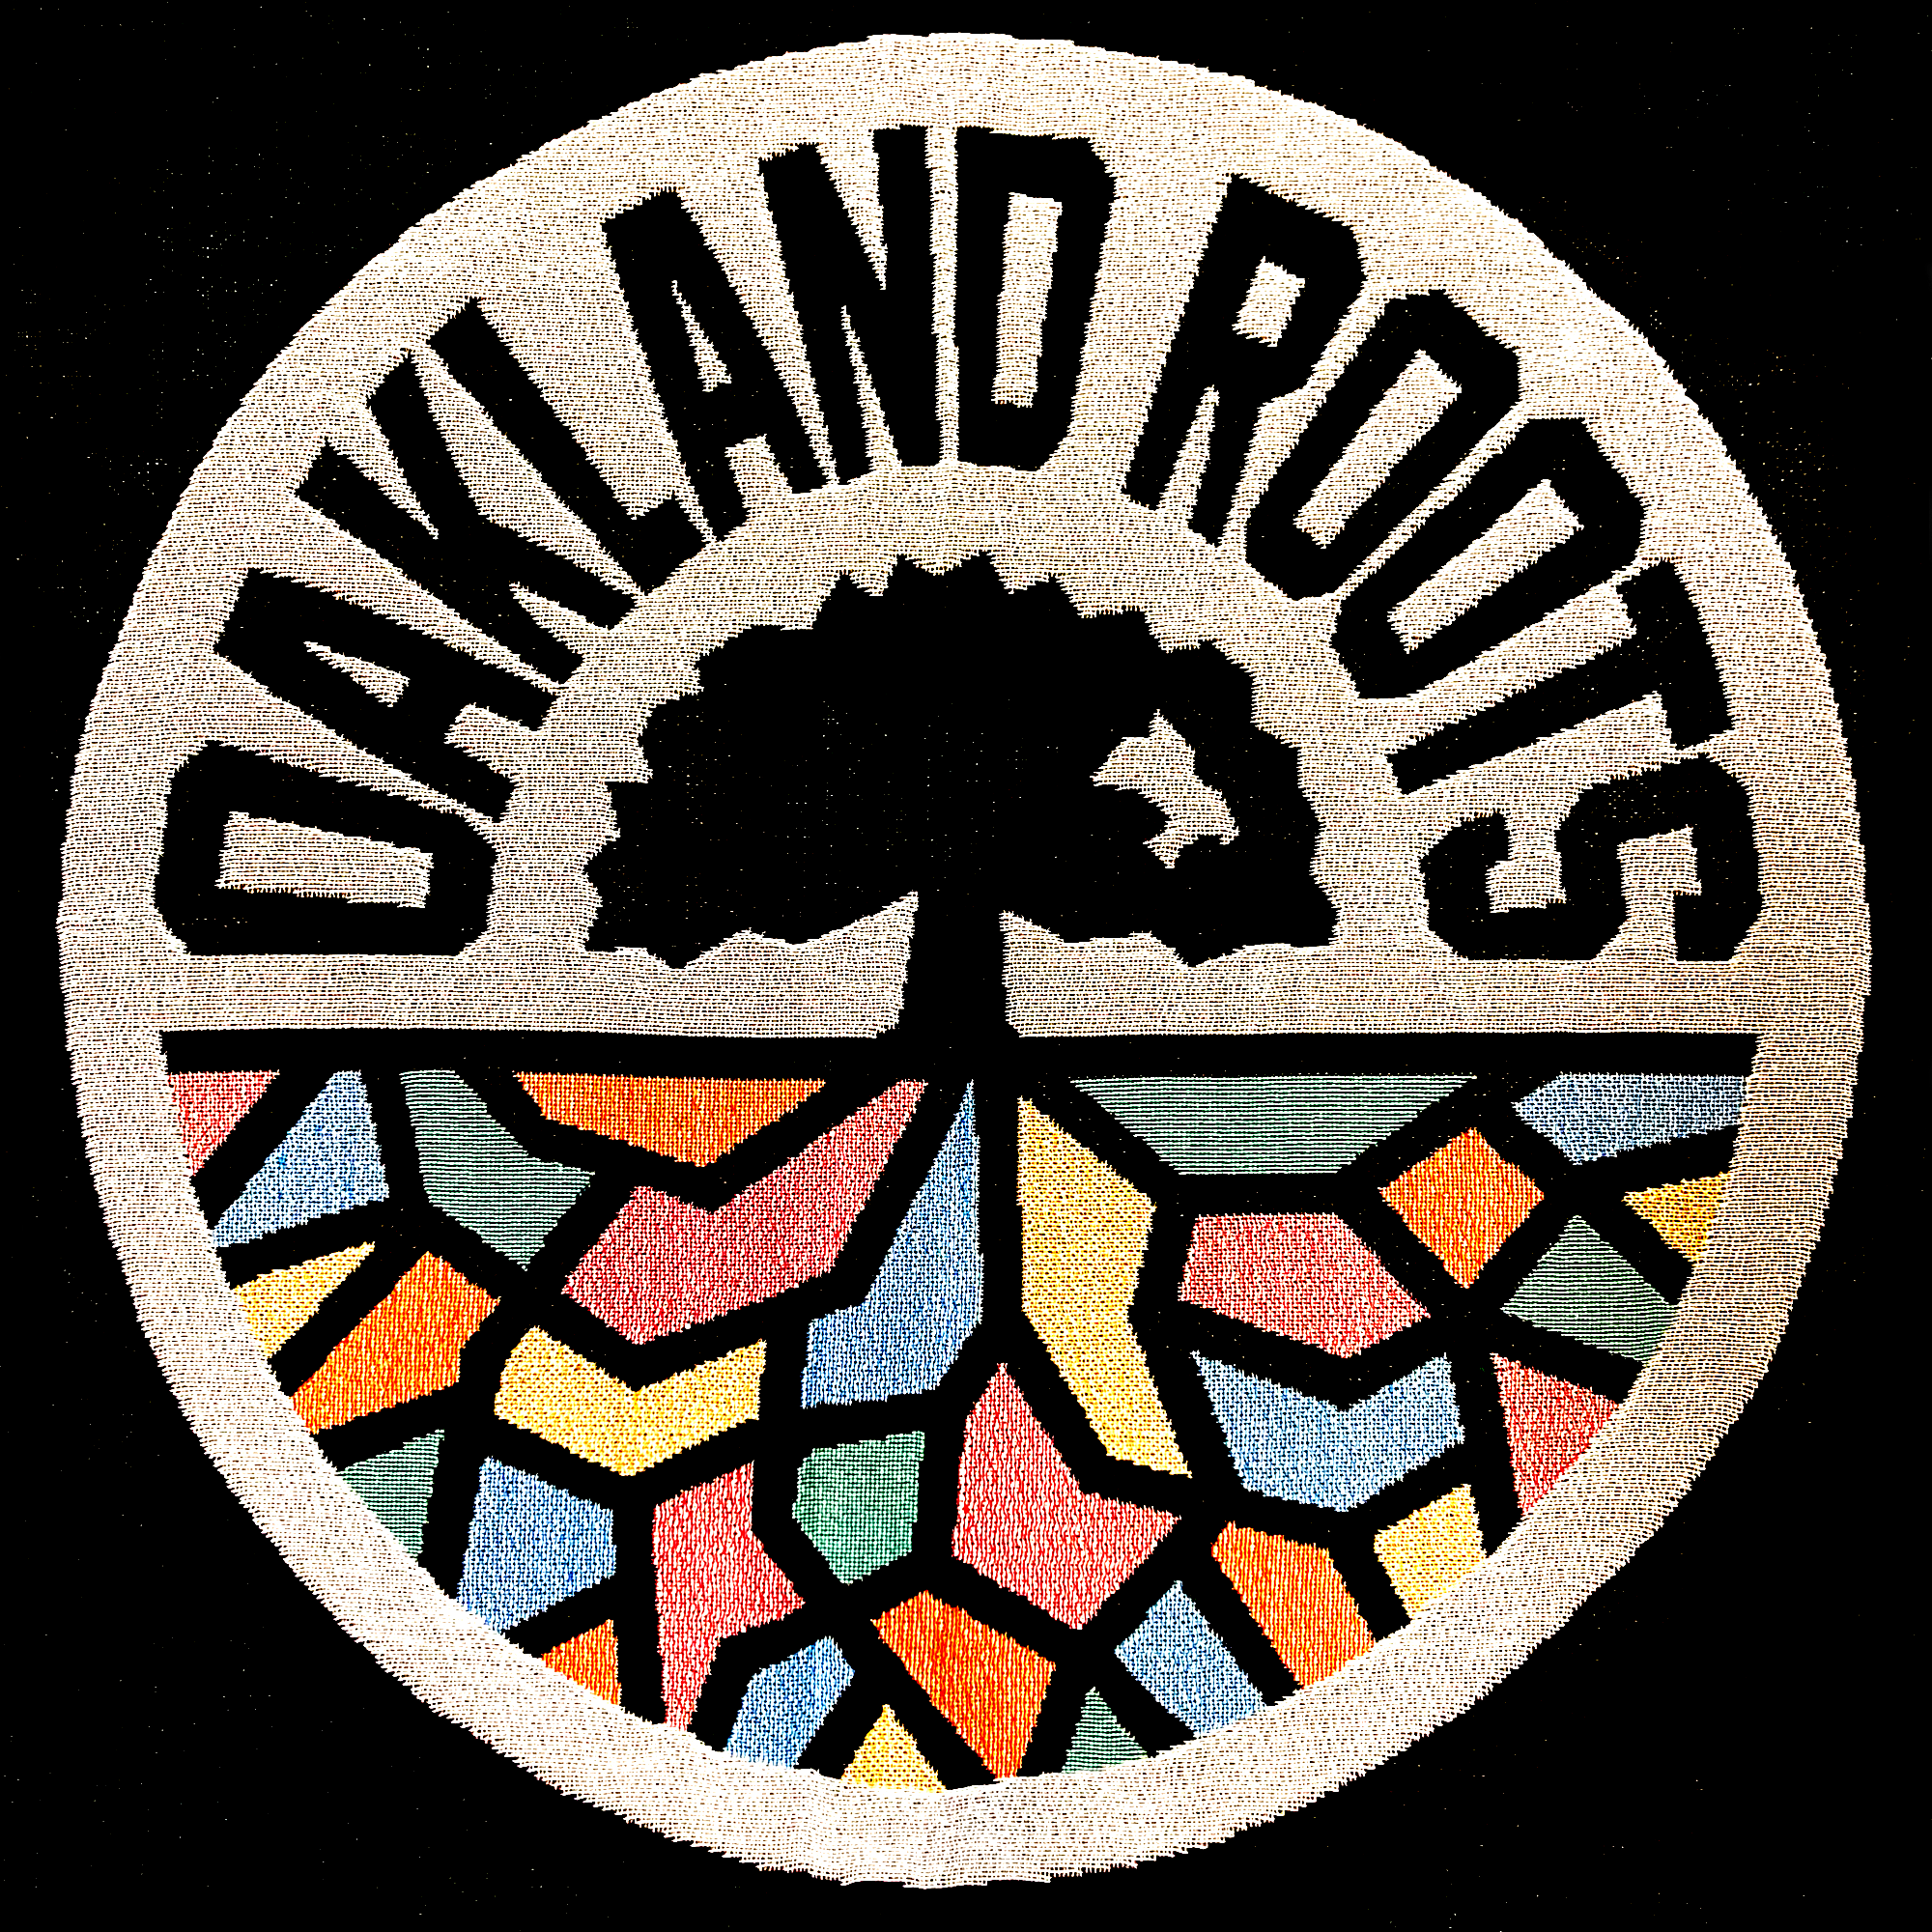 Detailed close-up of large full-color Oakland Roots SC circle logo on a black blanket.